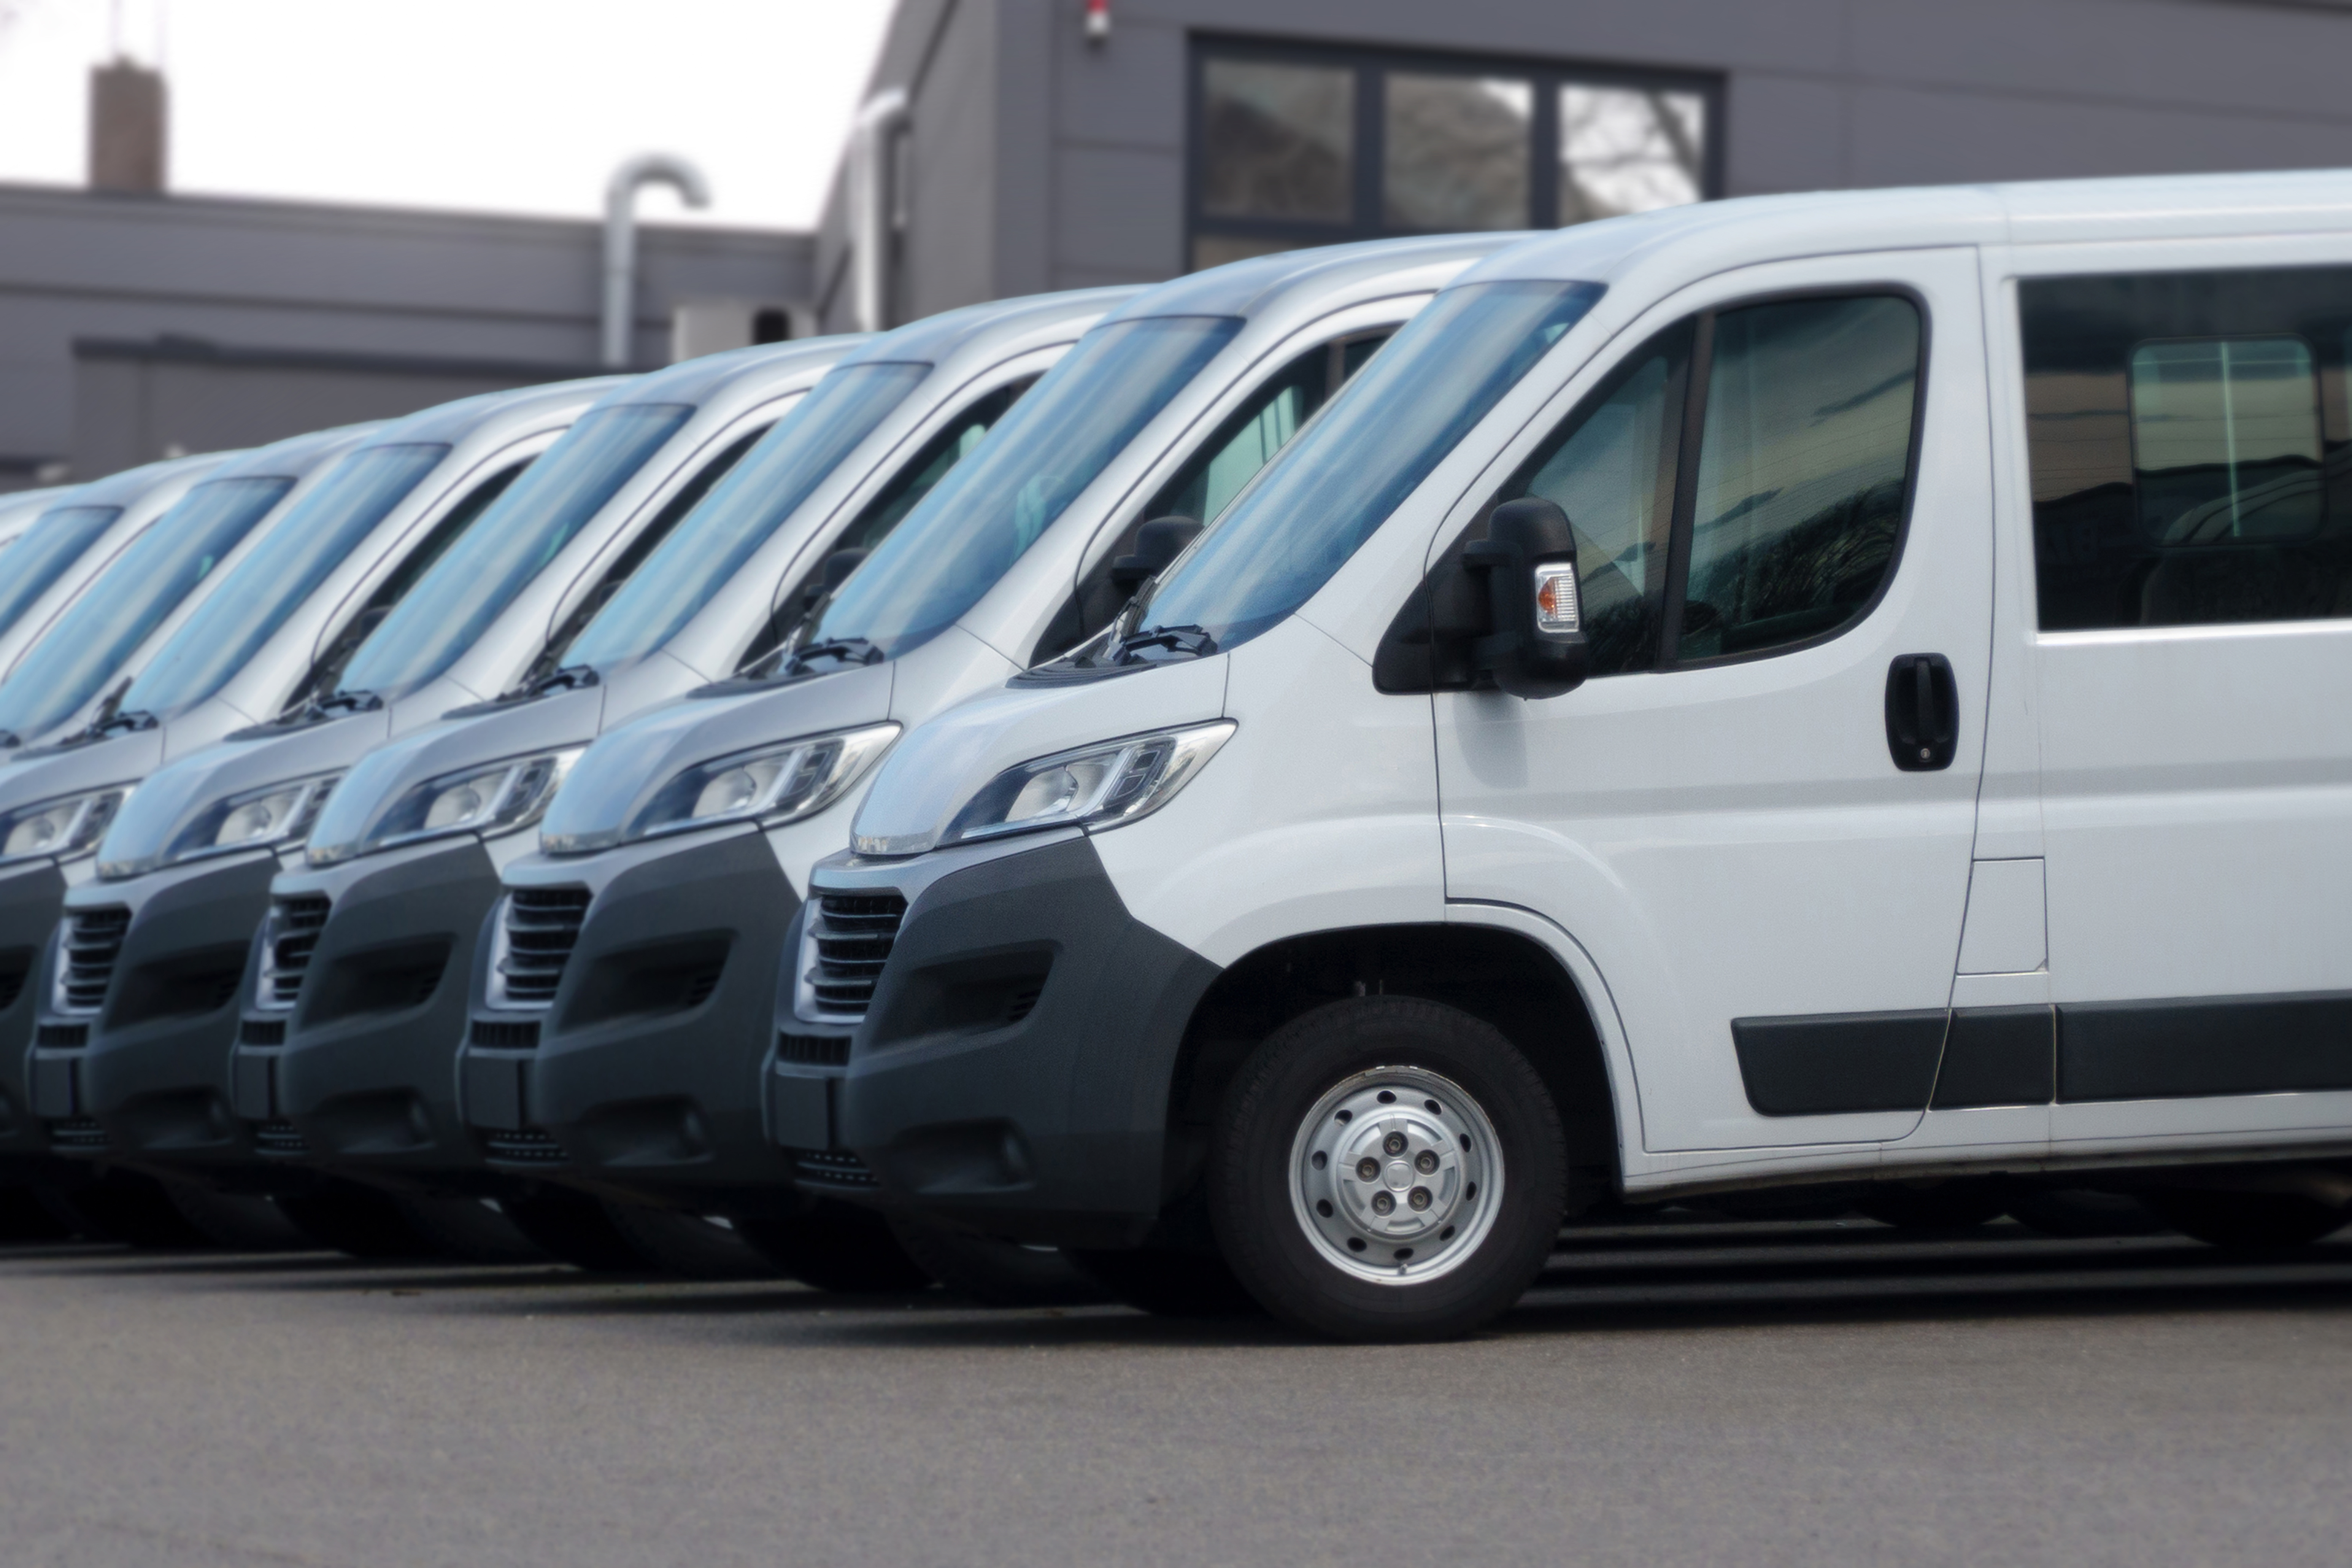 Image of a row of white vans to symbolize Kayo small business fleet management offering.